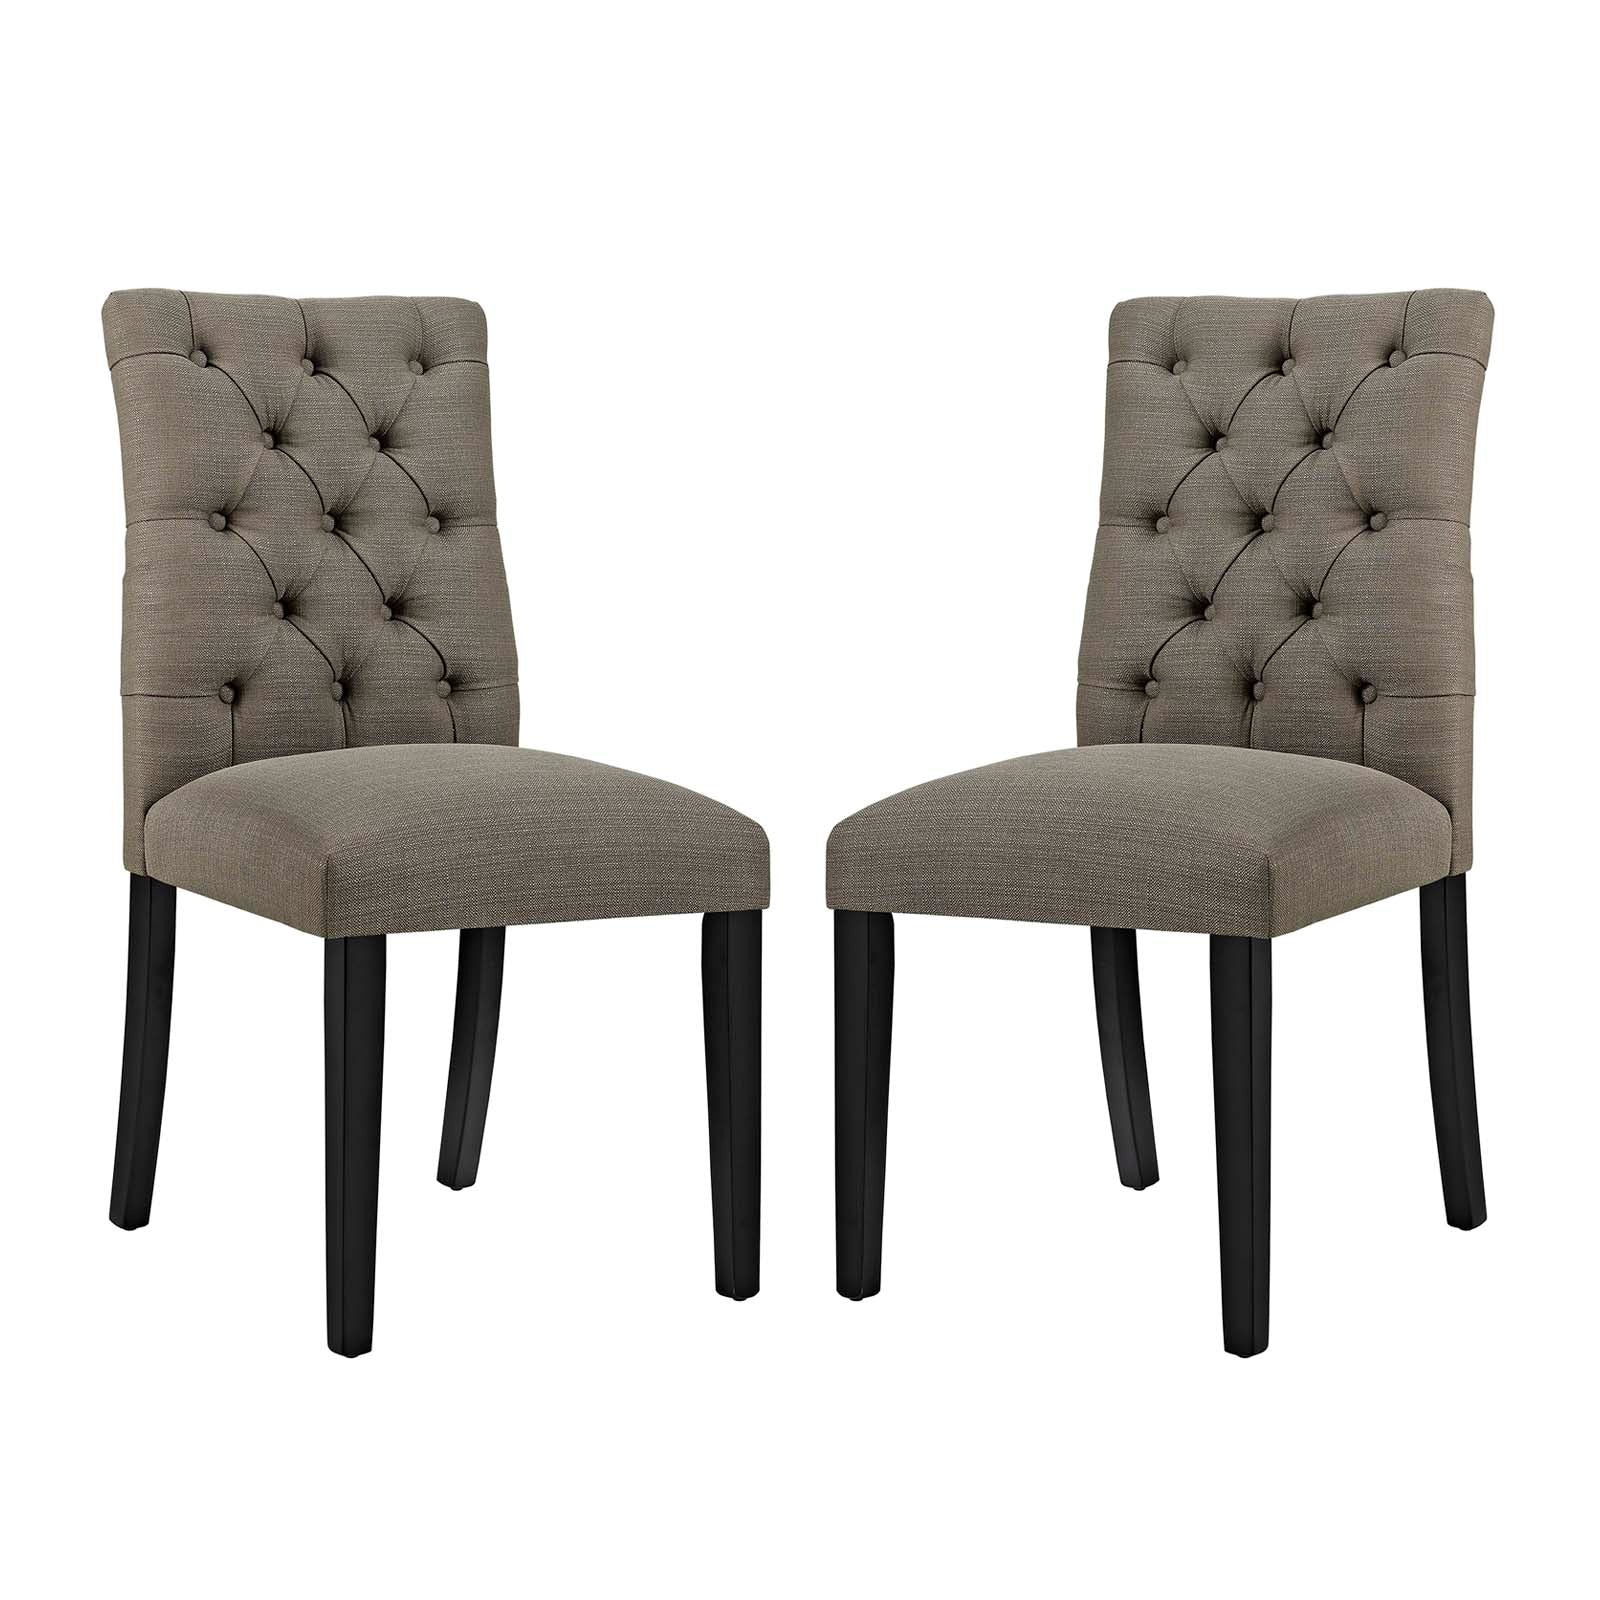 Modway Dining Chairs - Duchess Dining Chair Fabric ( Set of 2 ) Granite